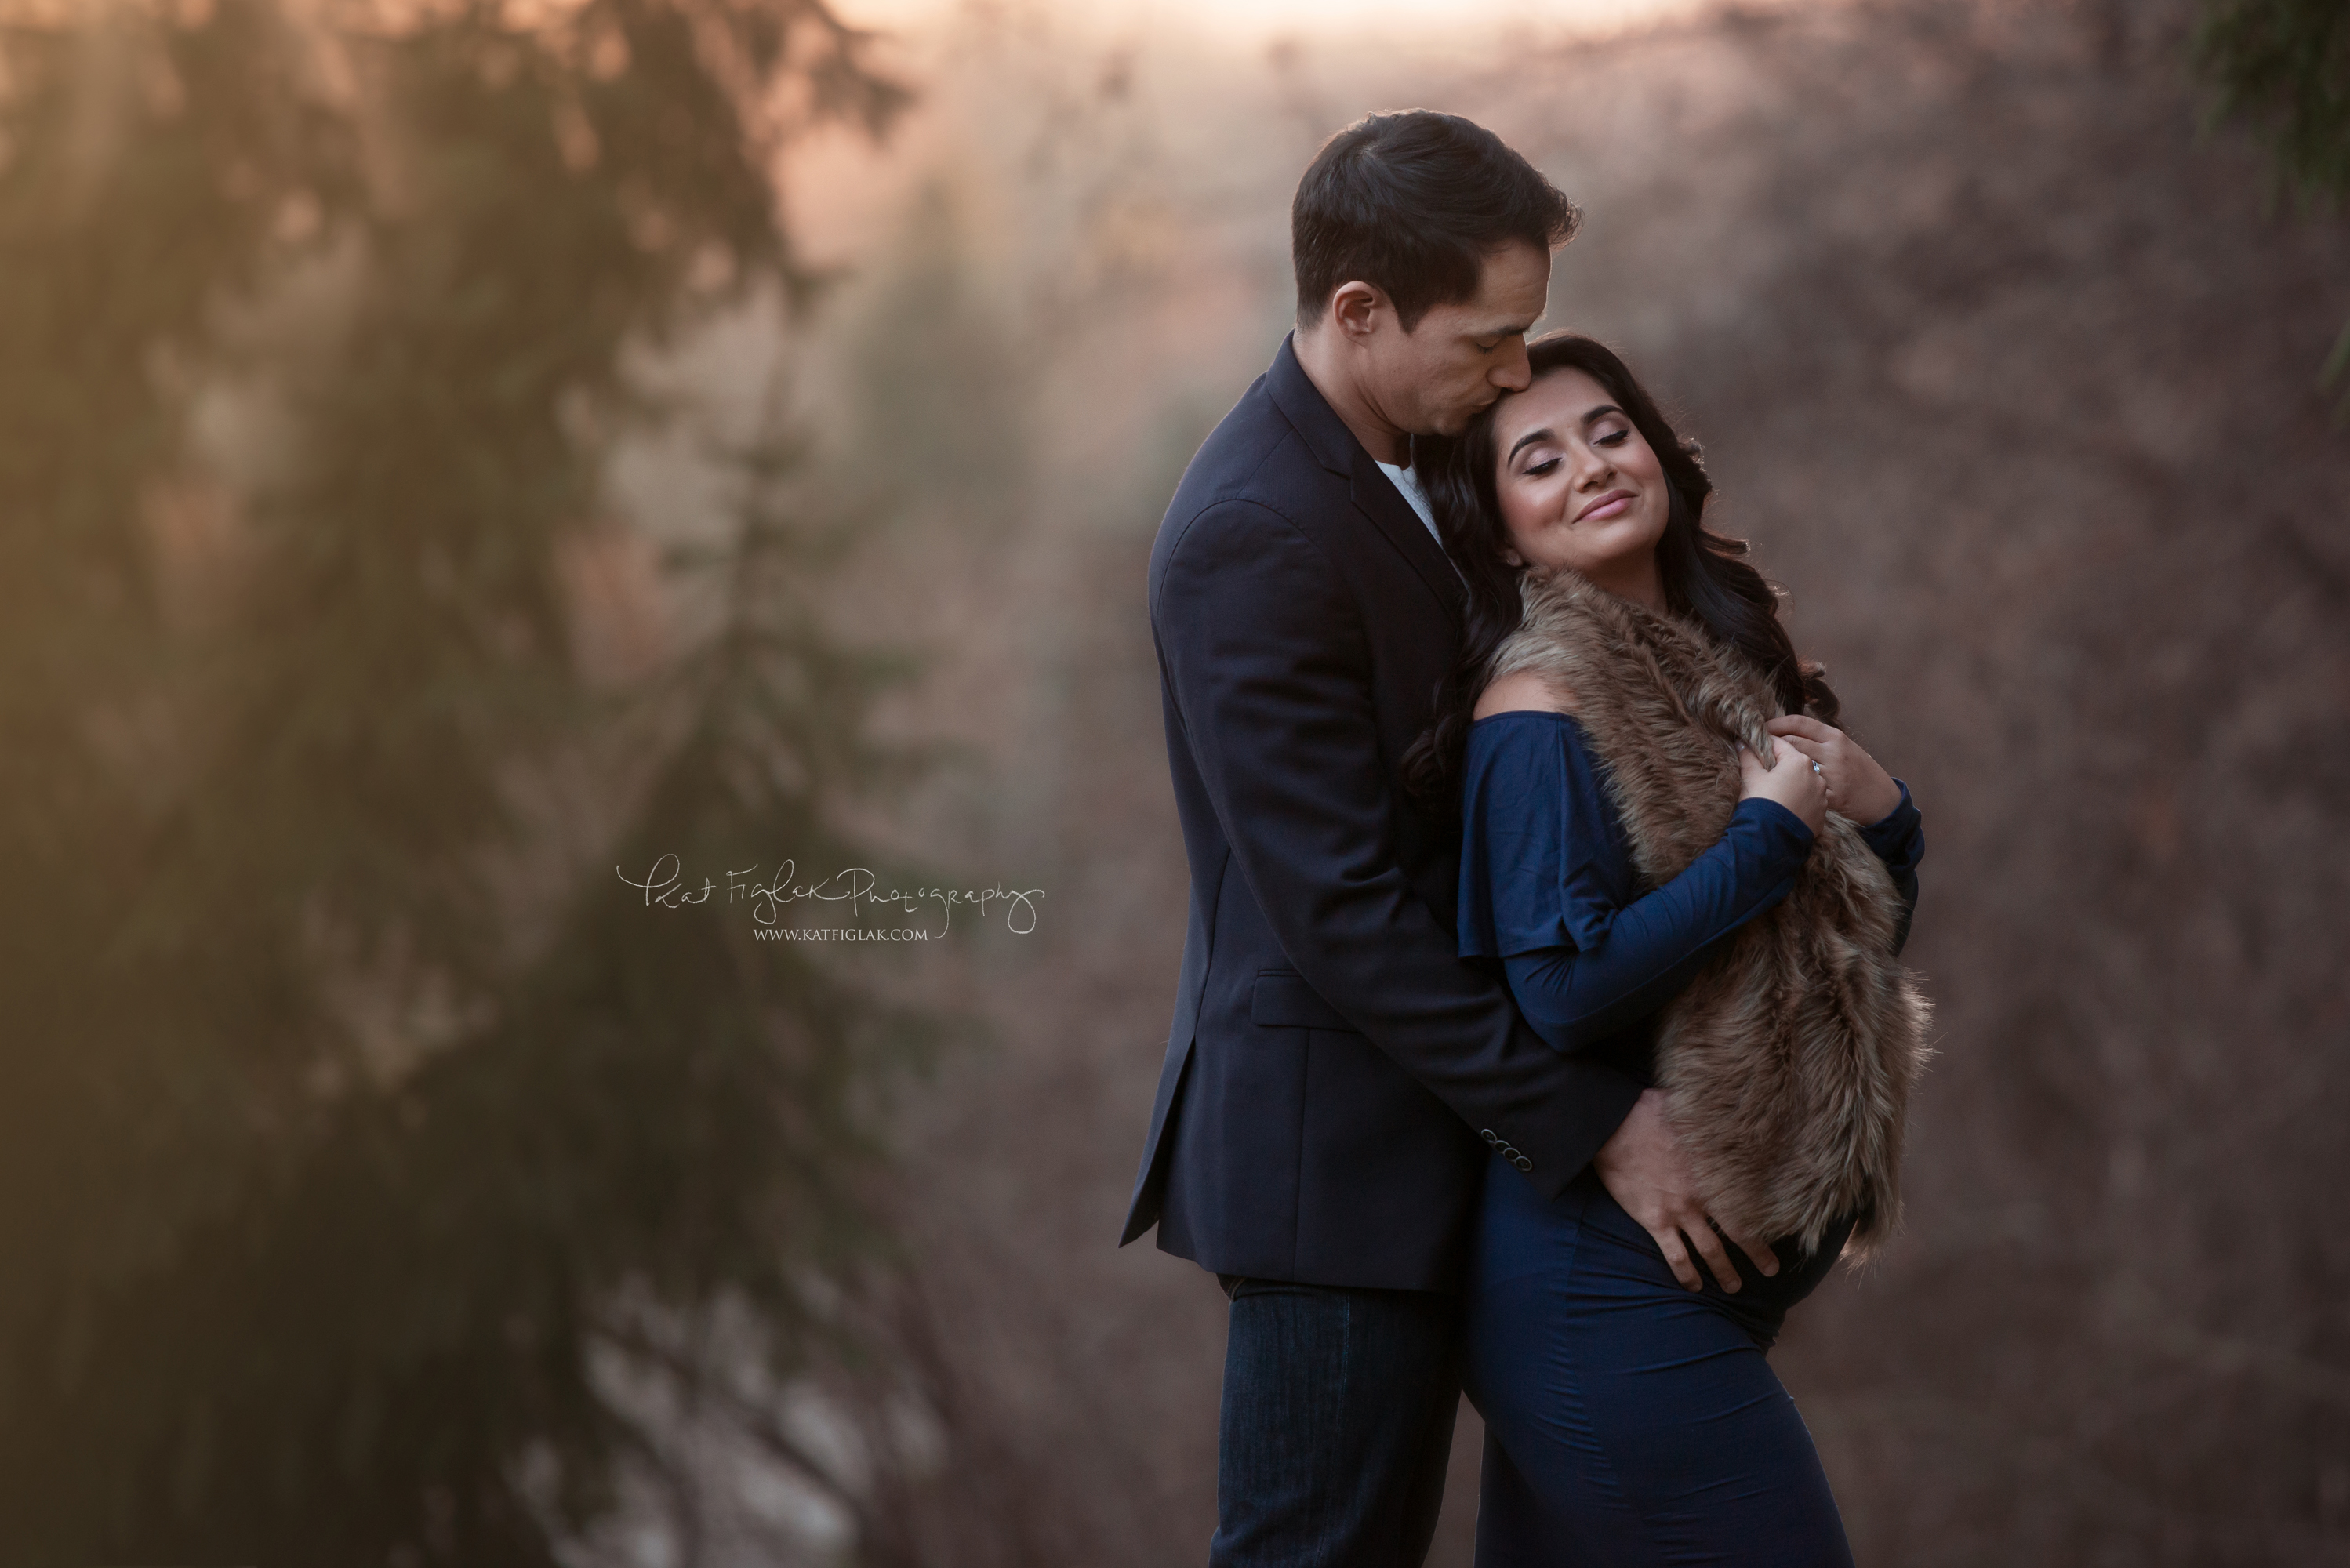 pregnant mom standing with her husband wearing a navy dress draped with fur